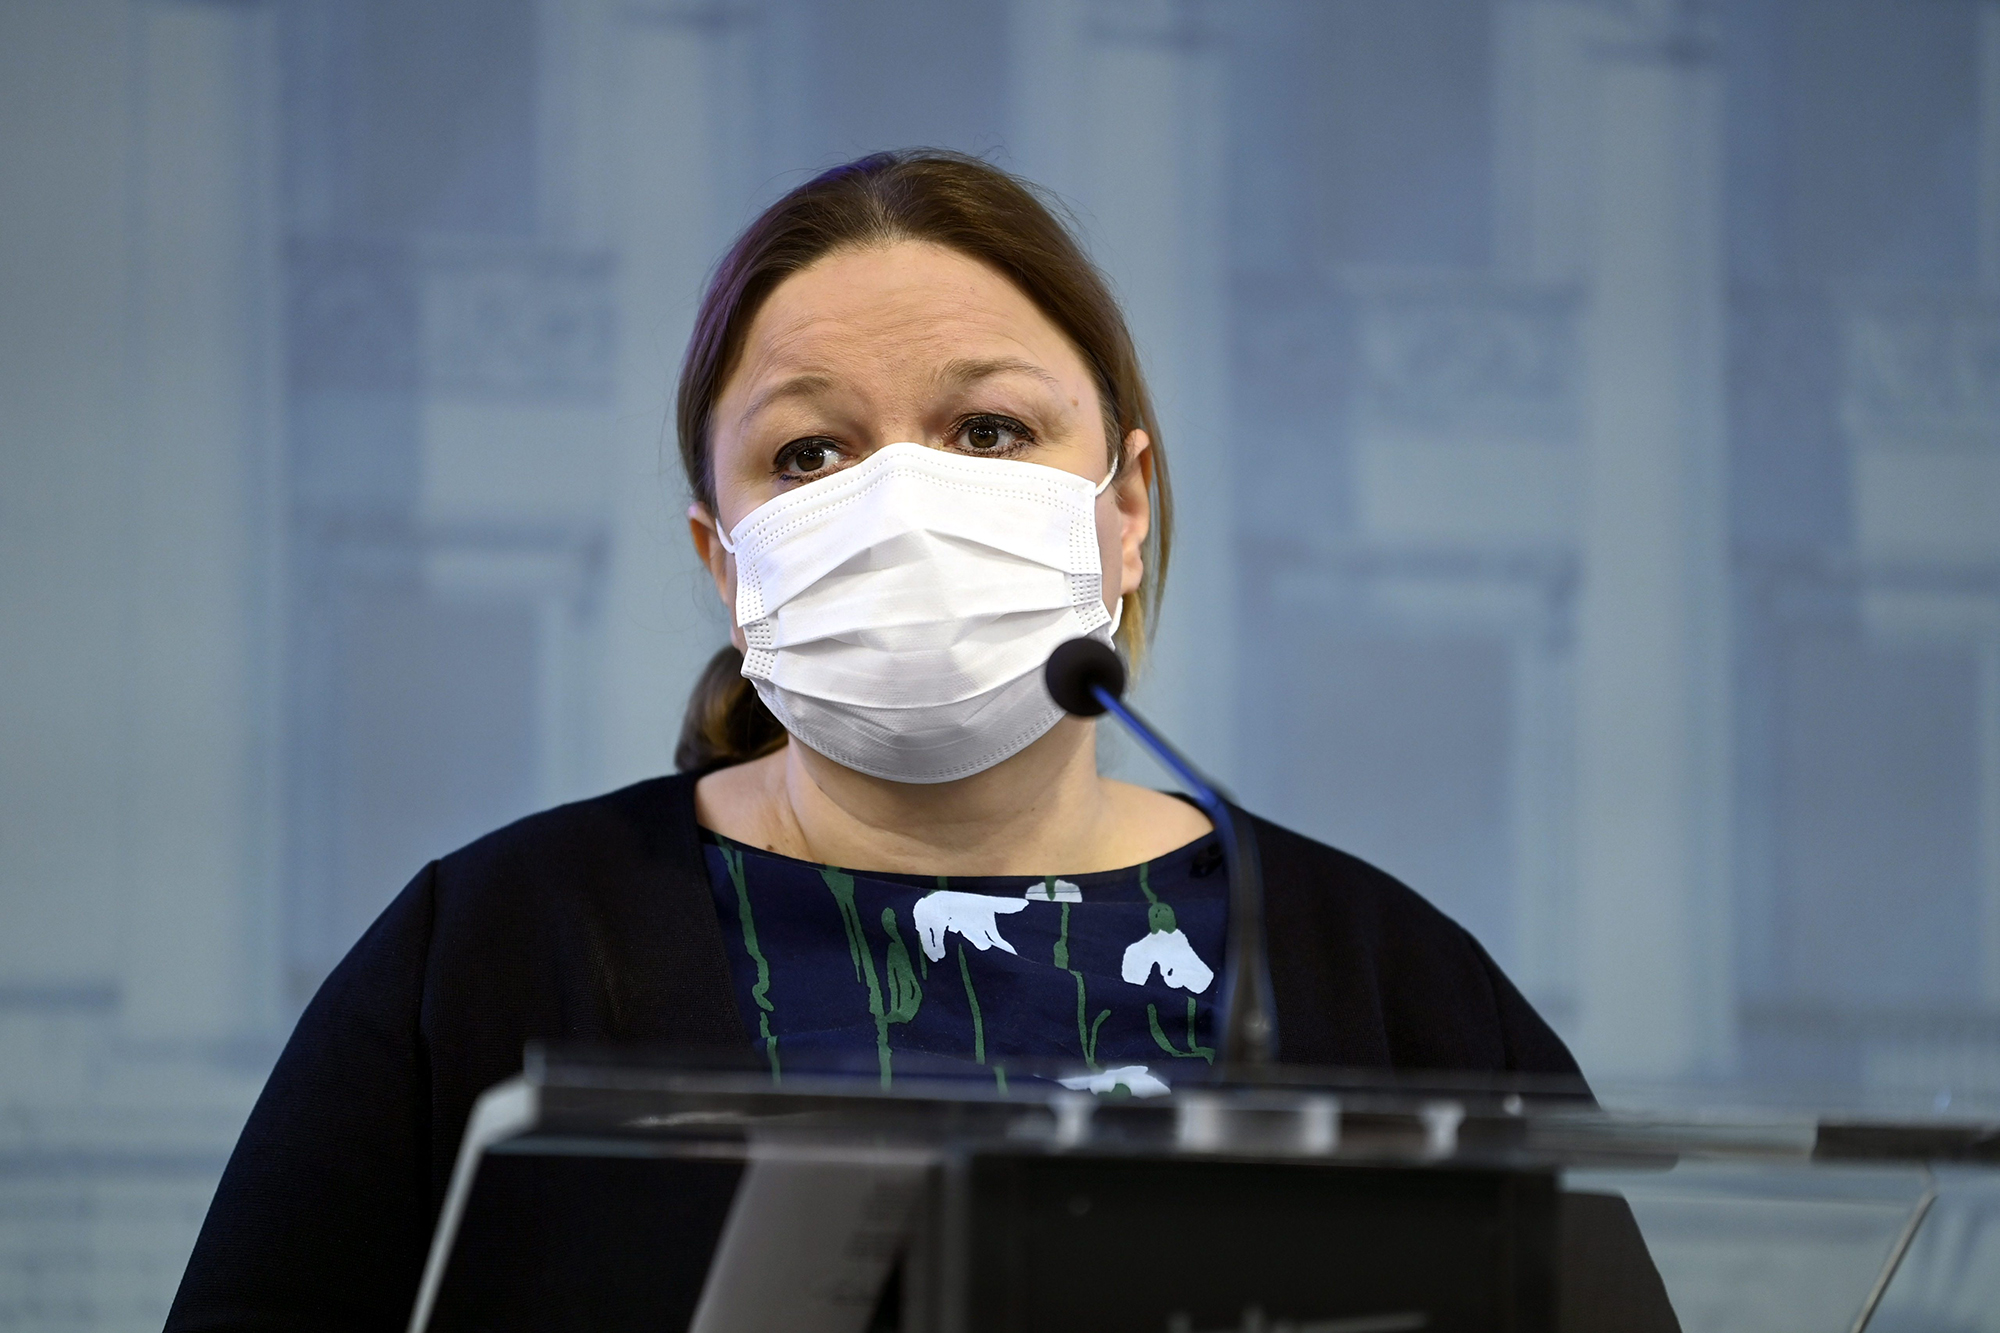 Finland is amending the Diseases Act to simplify the closure of companies